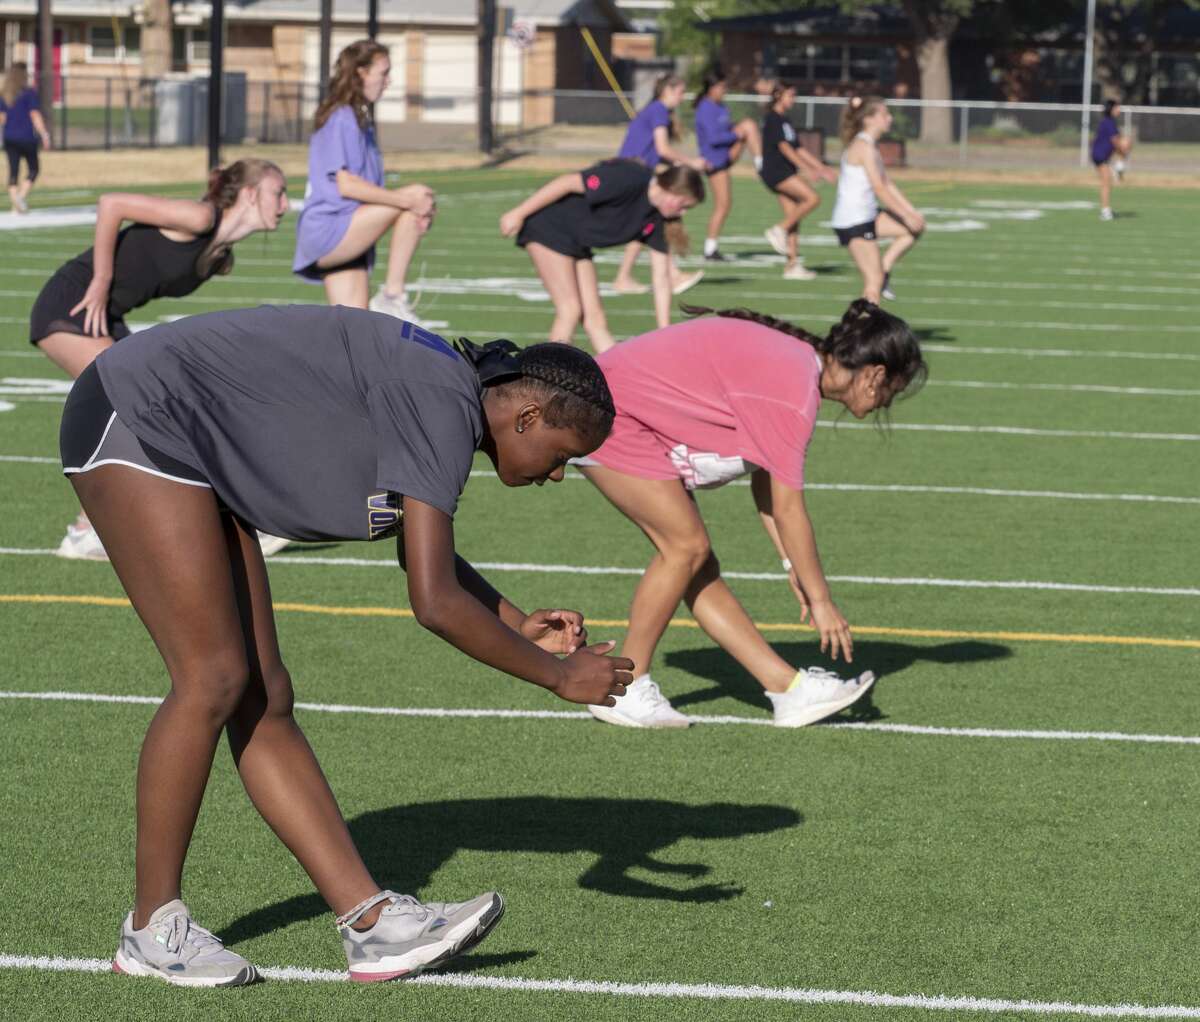 Midland High volleyball players spread out across the turf field at San Jacinto Junior High 06/08/2020 for the first day UIL has allowed organized workouts since mid-March. Tim Fischer/Reporter-Telegram